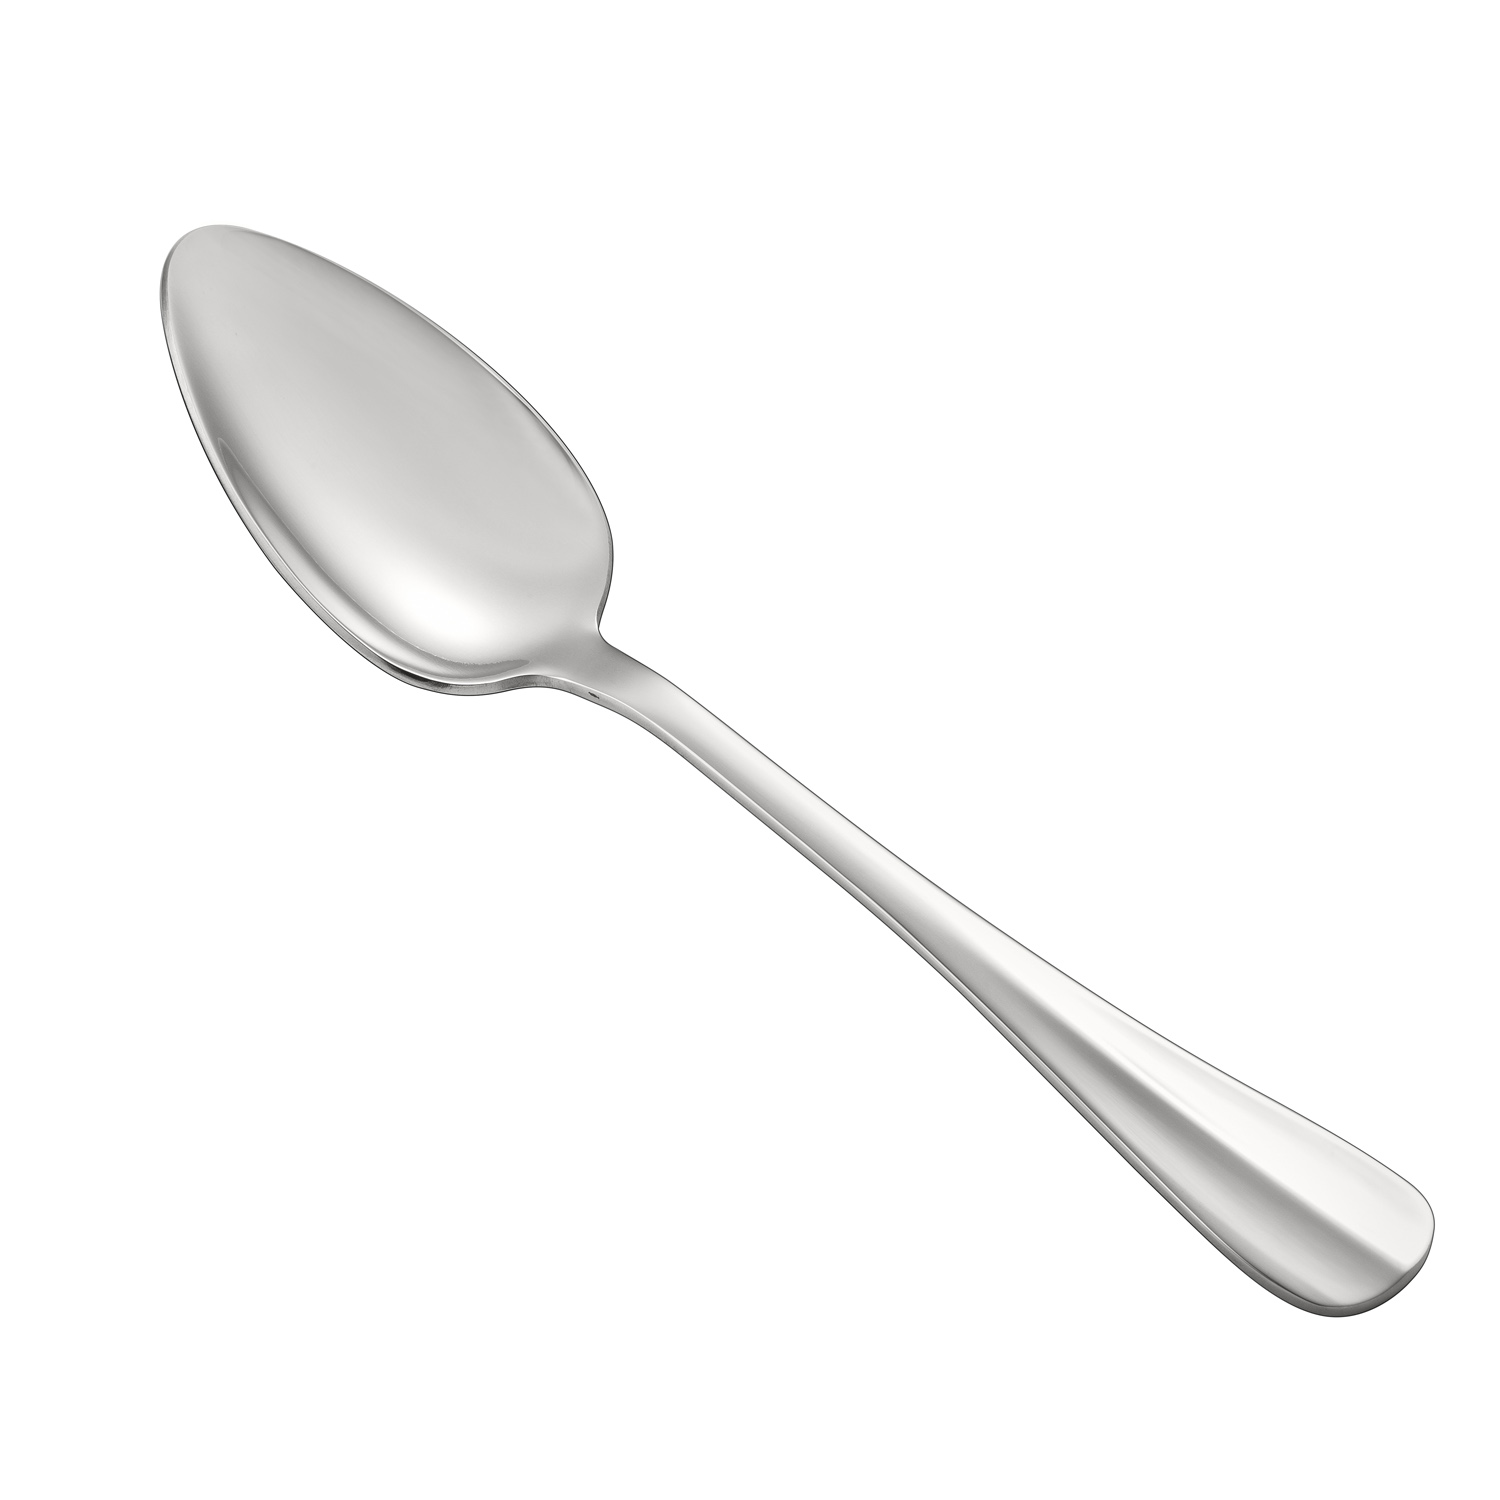 CAC China 8005-10 Exquisite Tablespoon, Extra Heavyweight 18/8, 8 5/8"